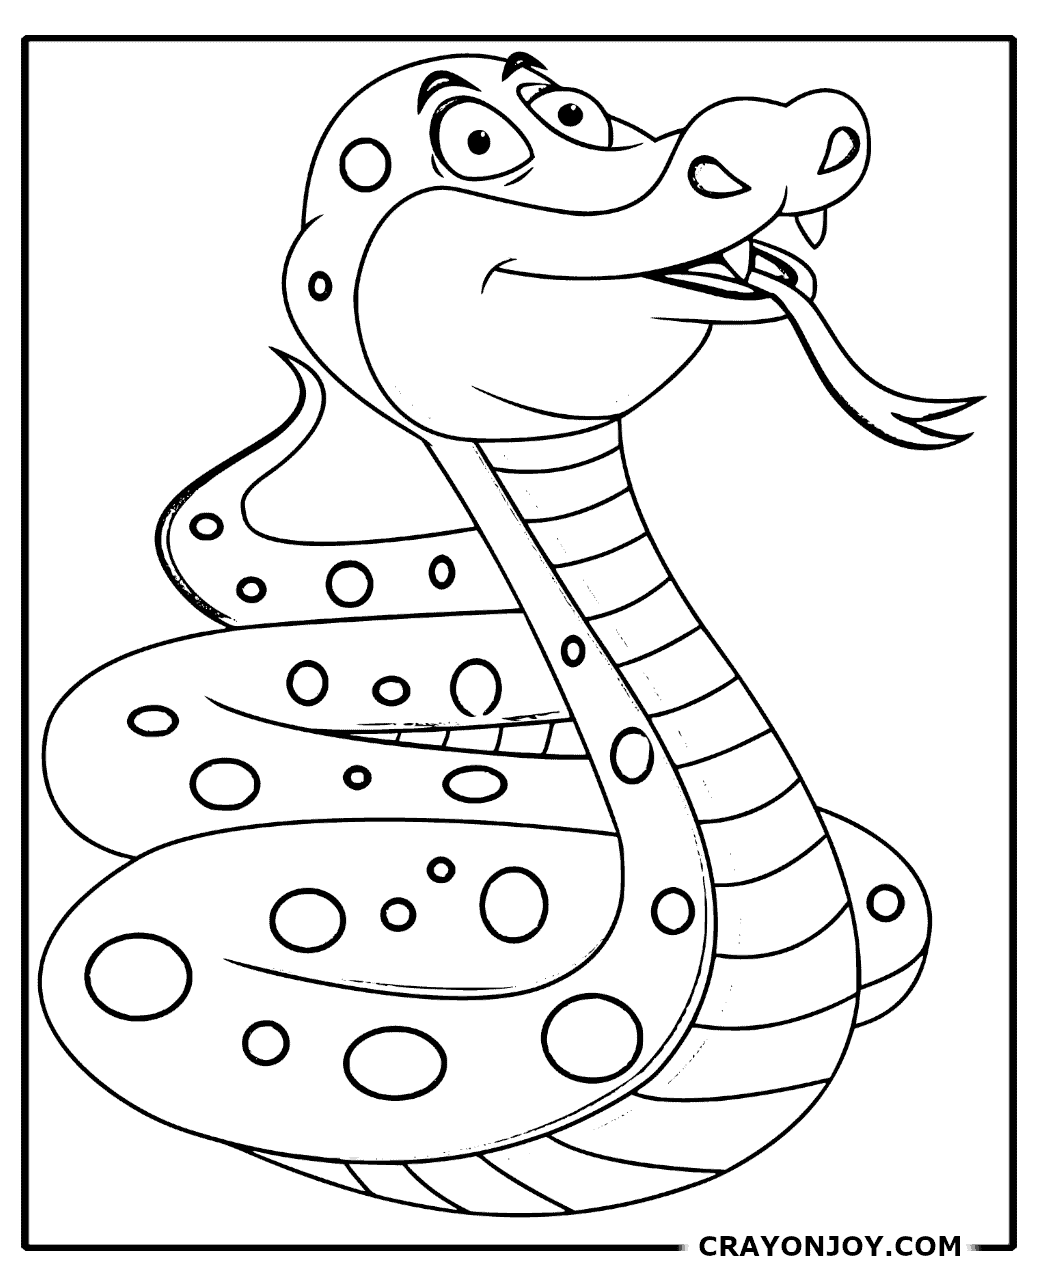 Gopher Snake Coloring Pages: Free Printable Sheets for Kids and Adults